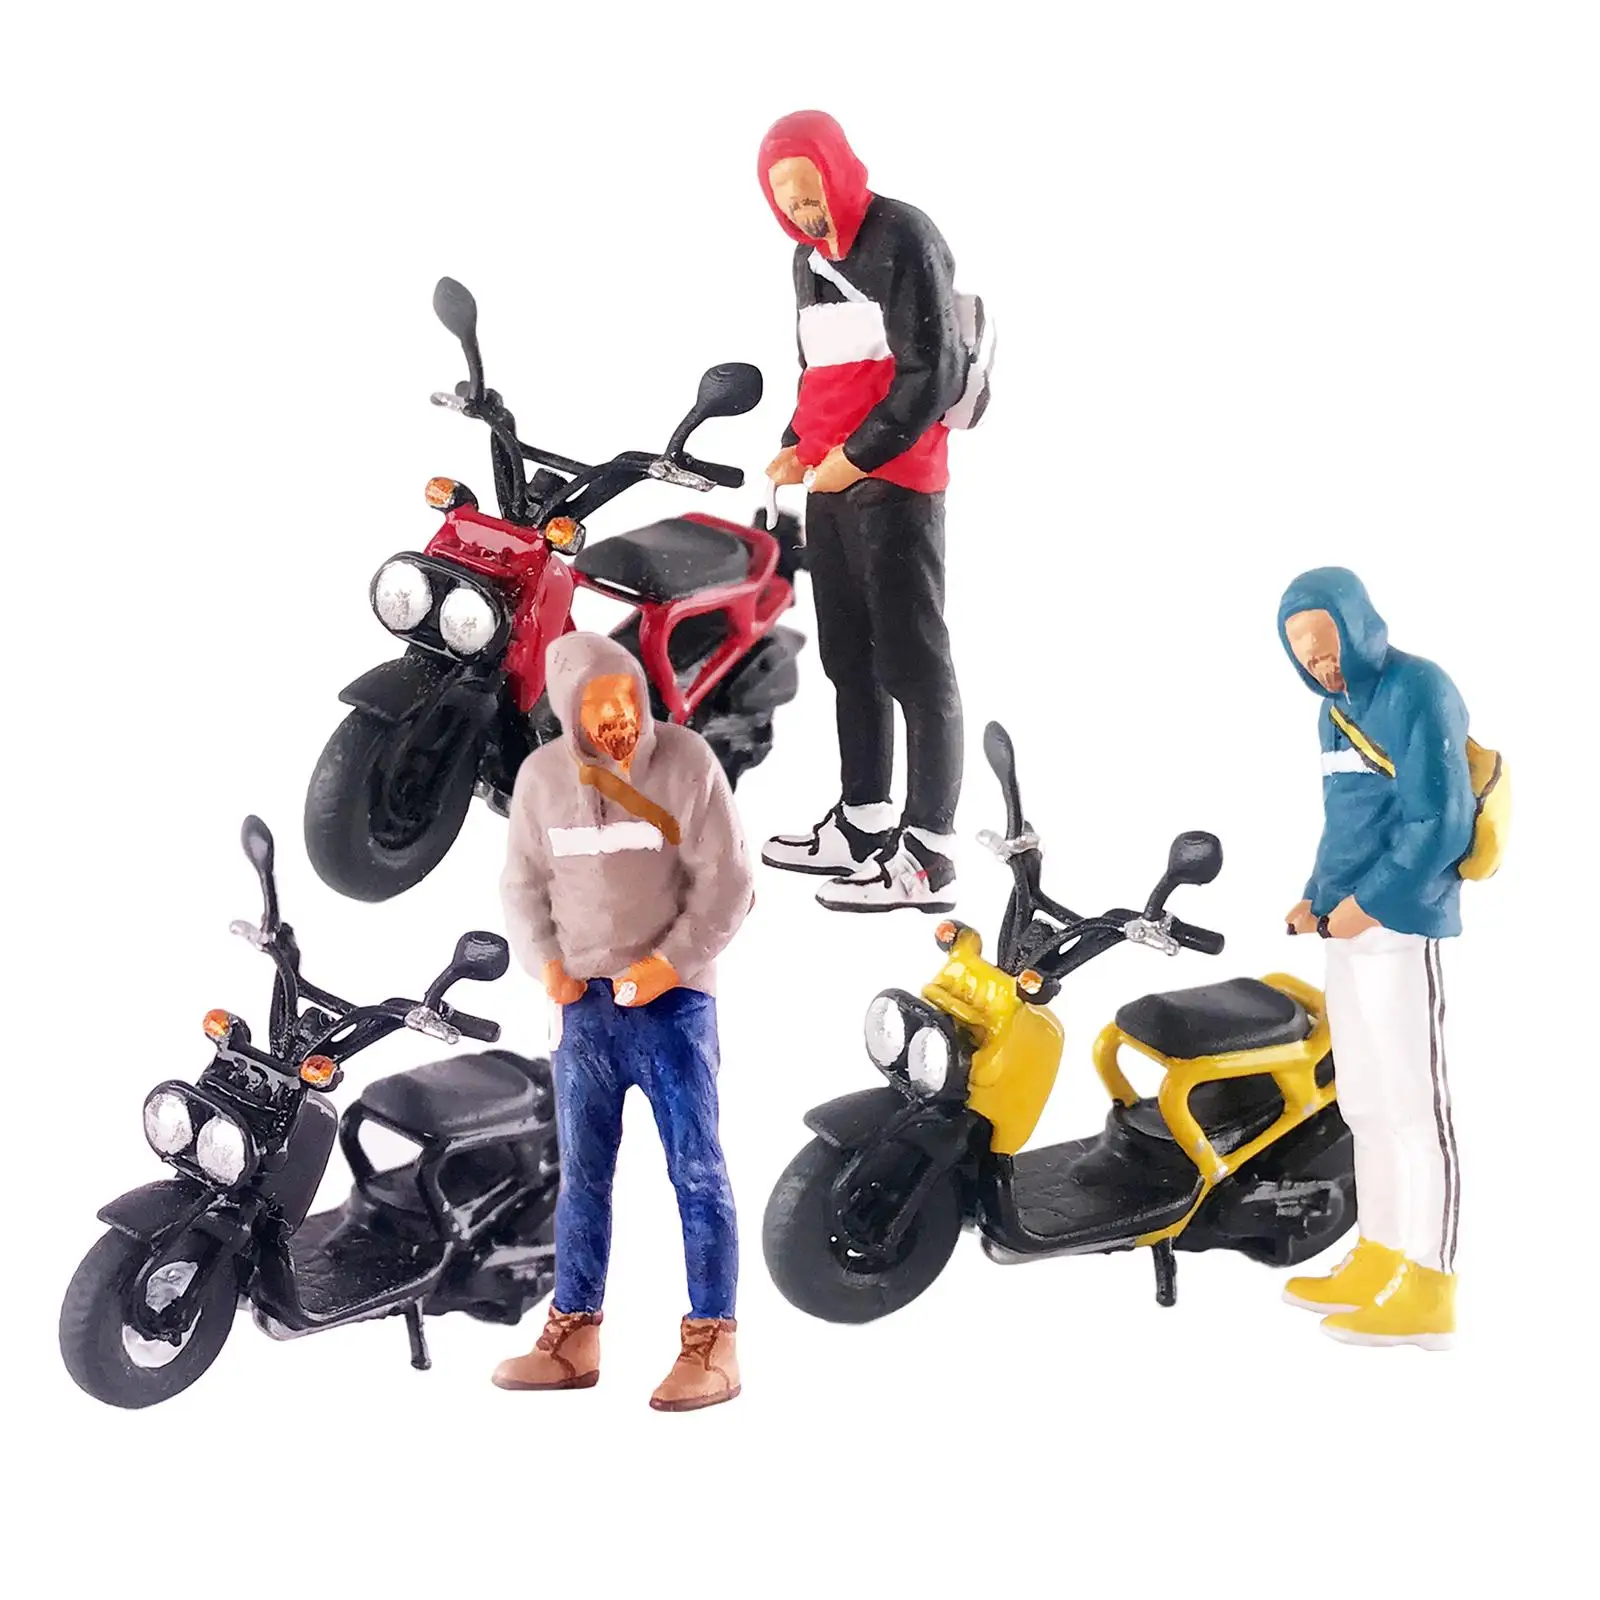 1:64 Figure Driving Motorcycle Movie Character Scene, Model Train Diorama Scenery DIY Projects Accessory, S Gauge